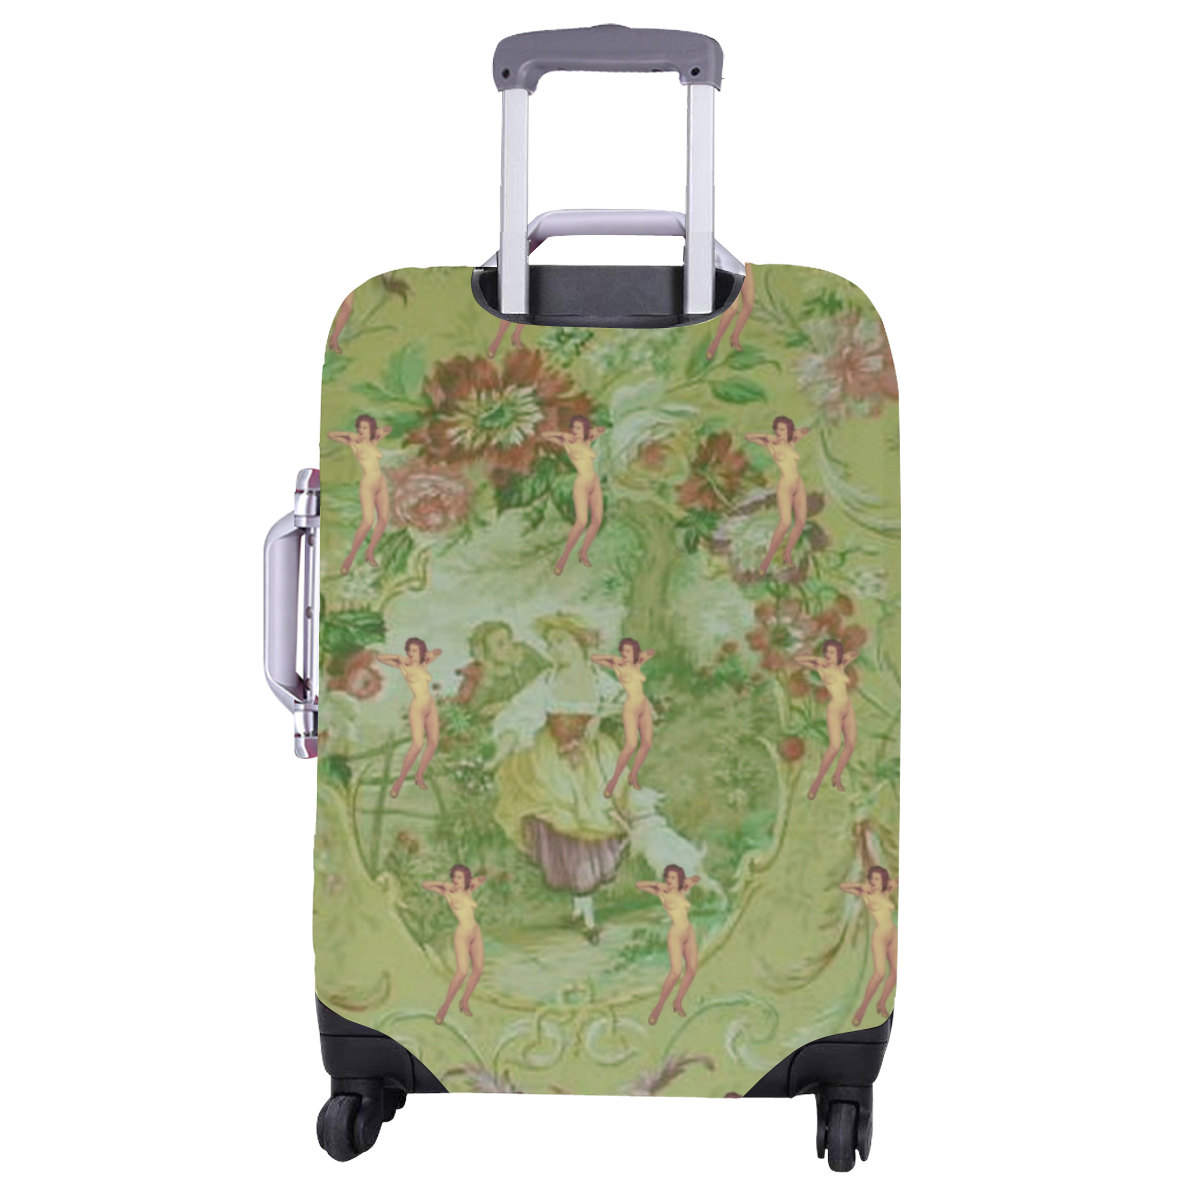 The Great Outdoors 2 Luggage Cover/Large 26"-28"